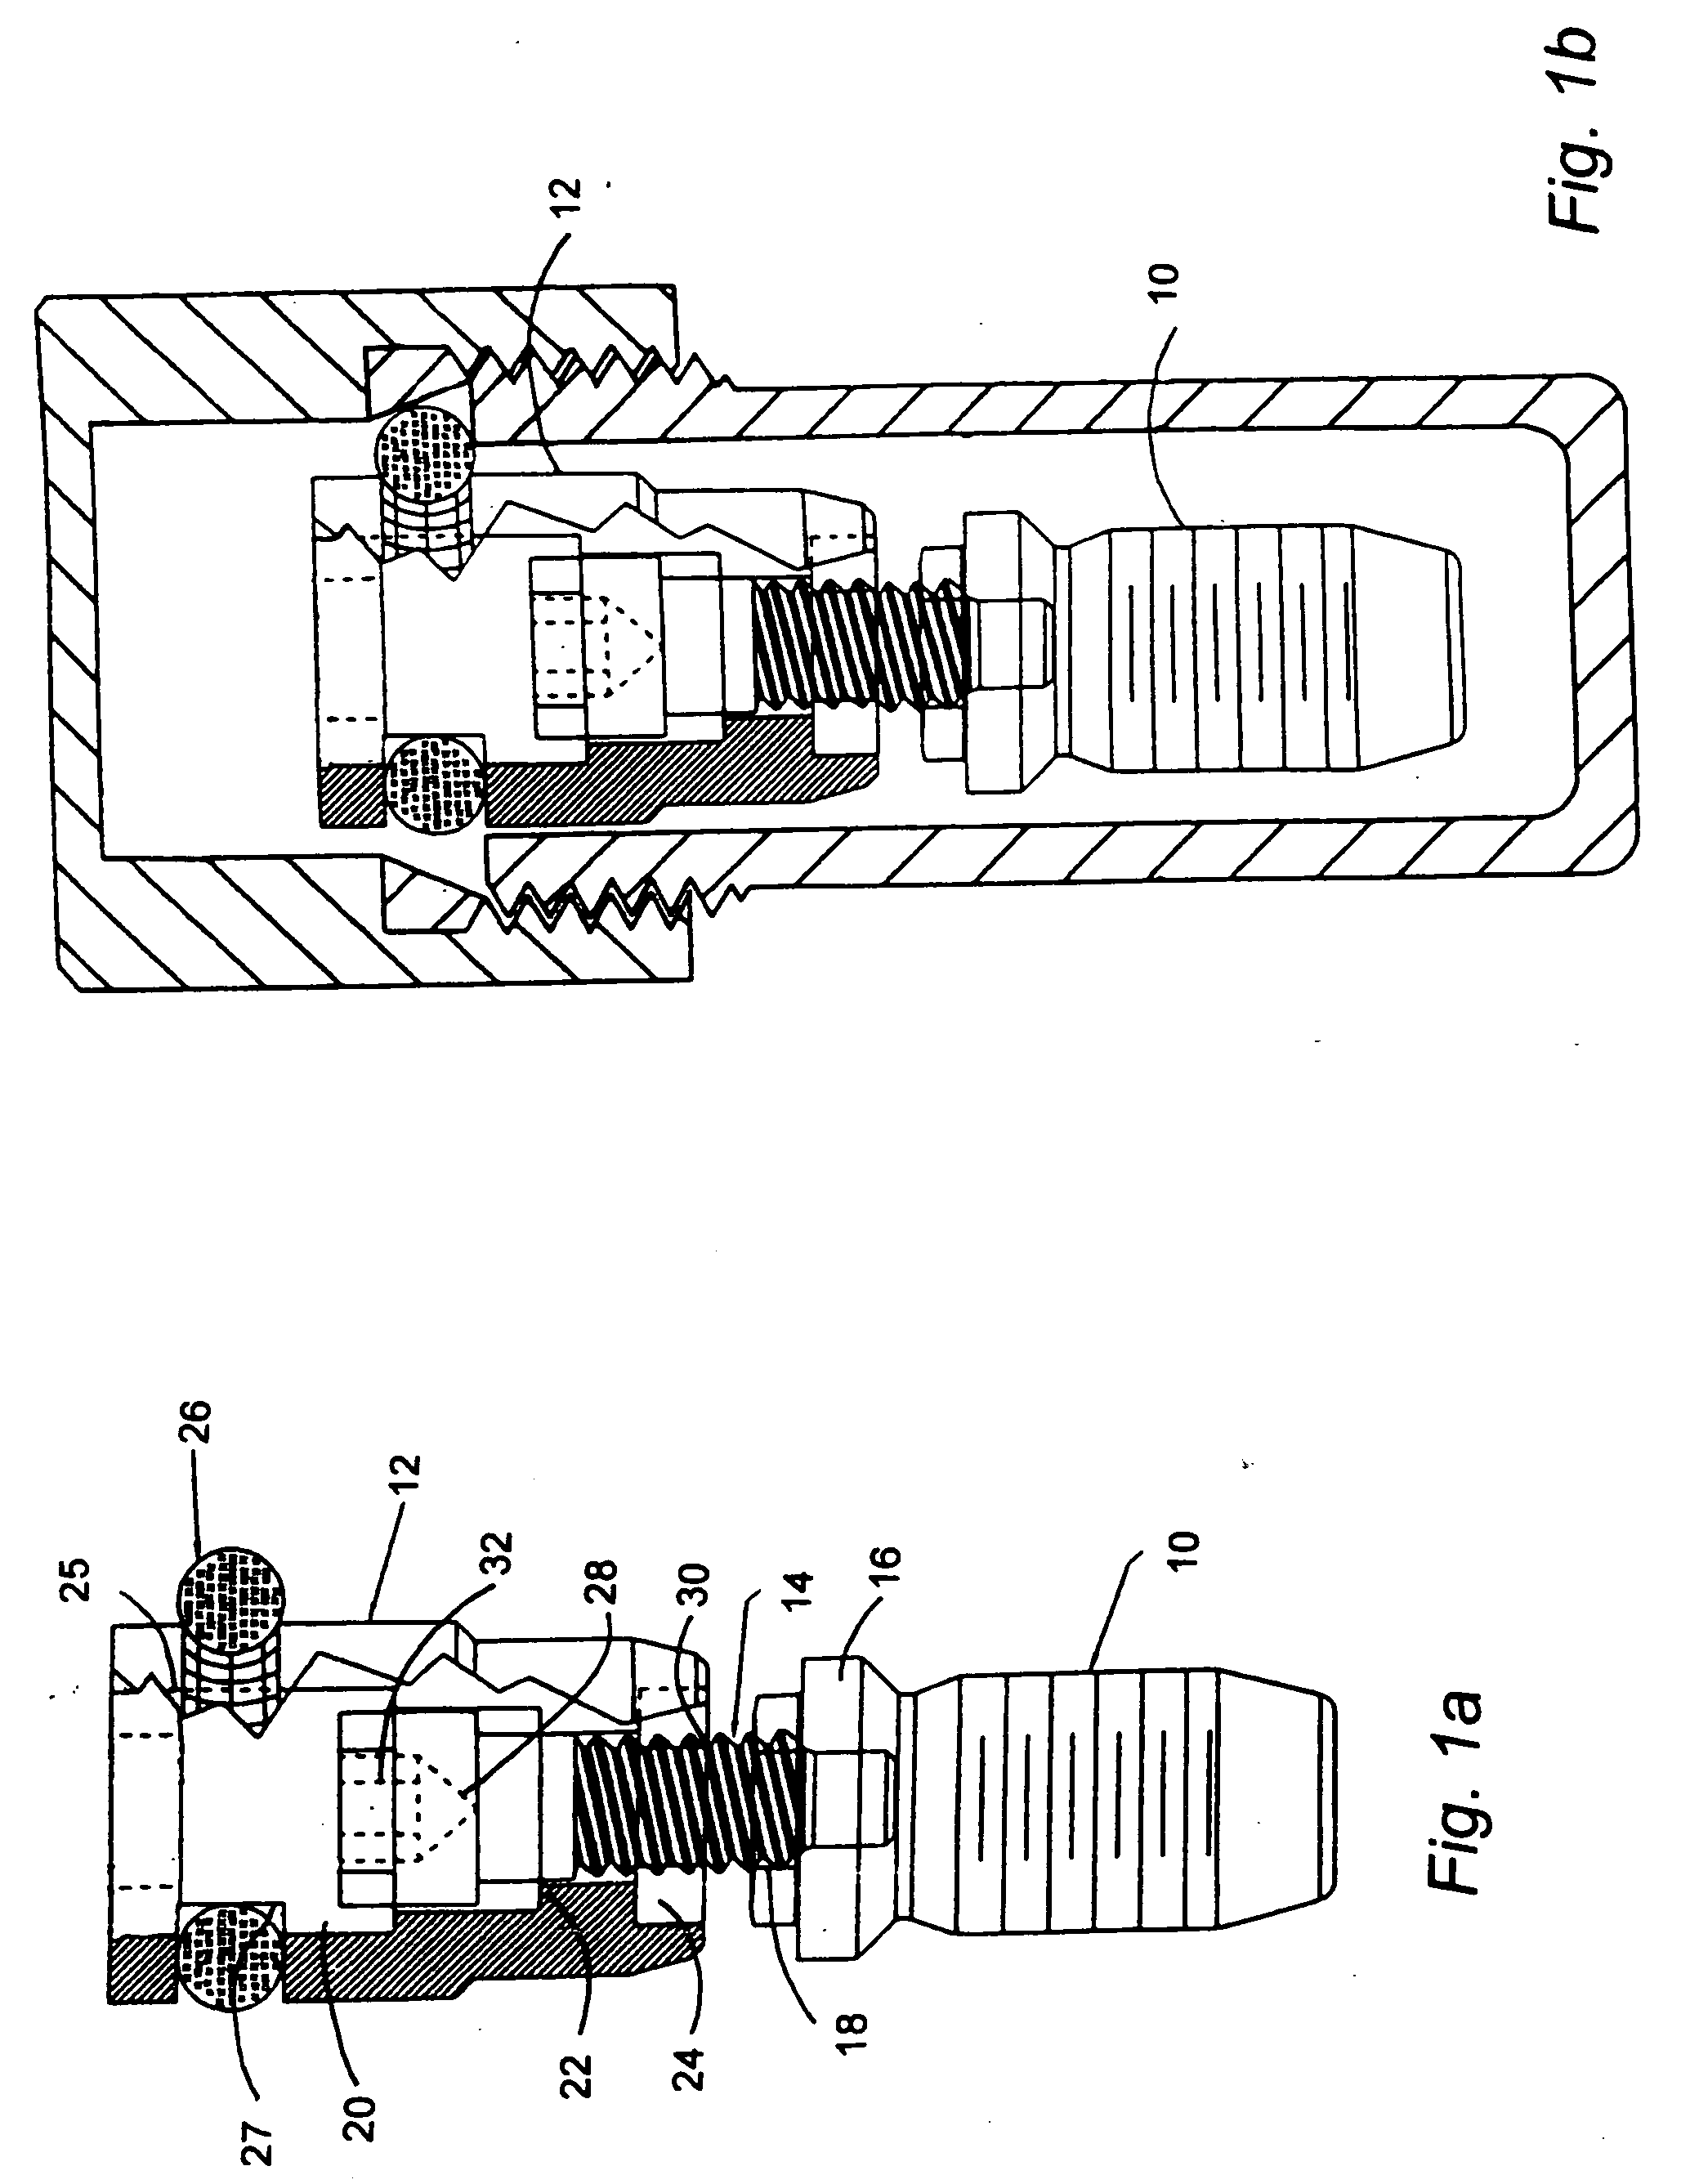 Implant delivery system